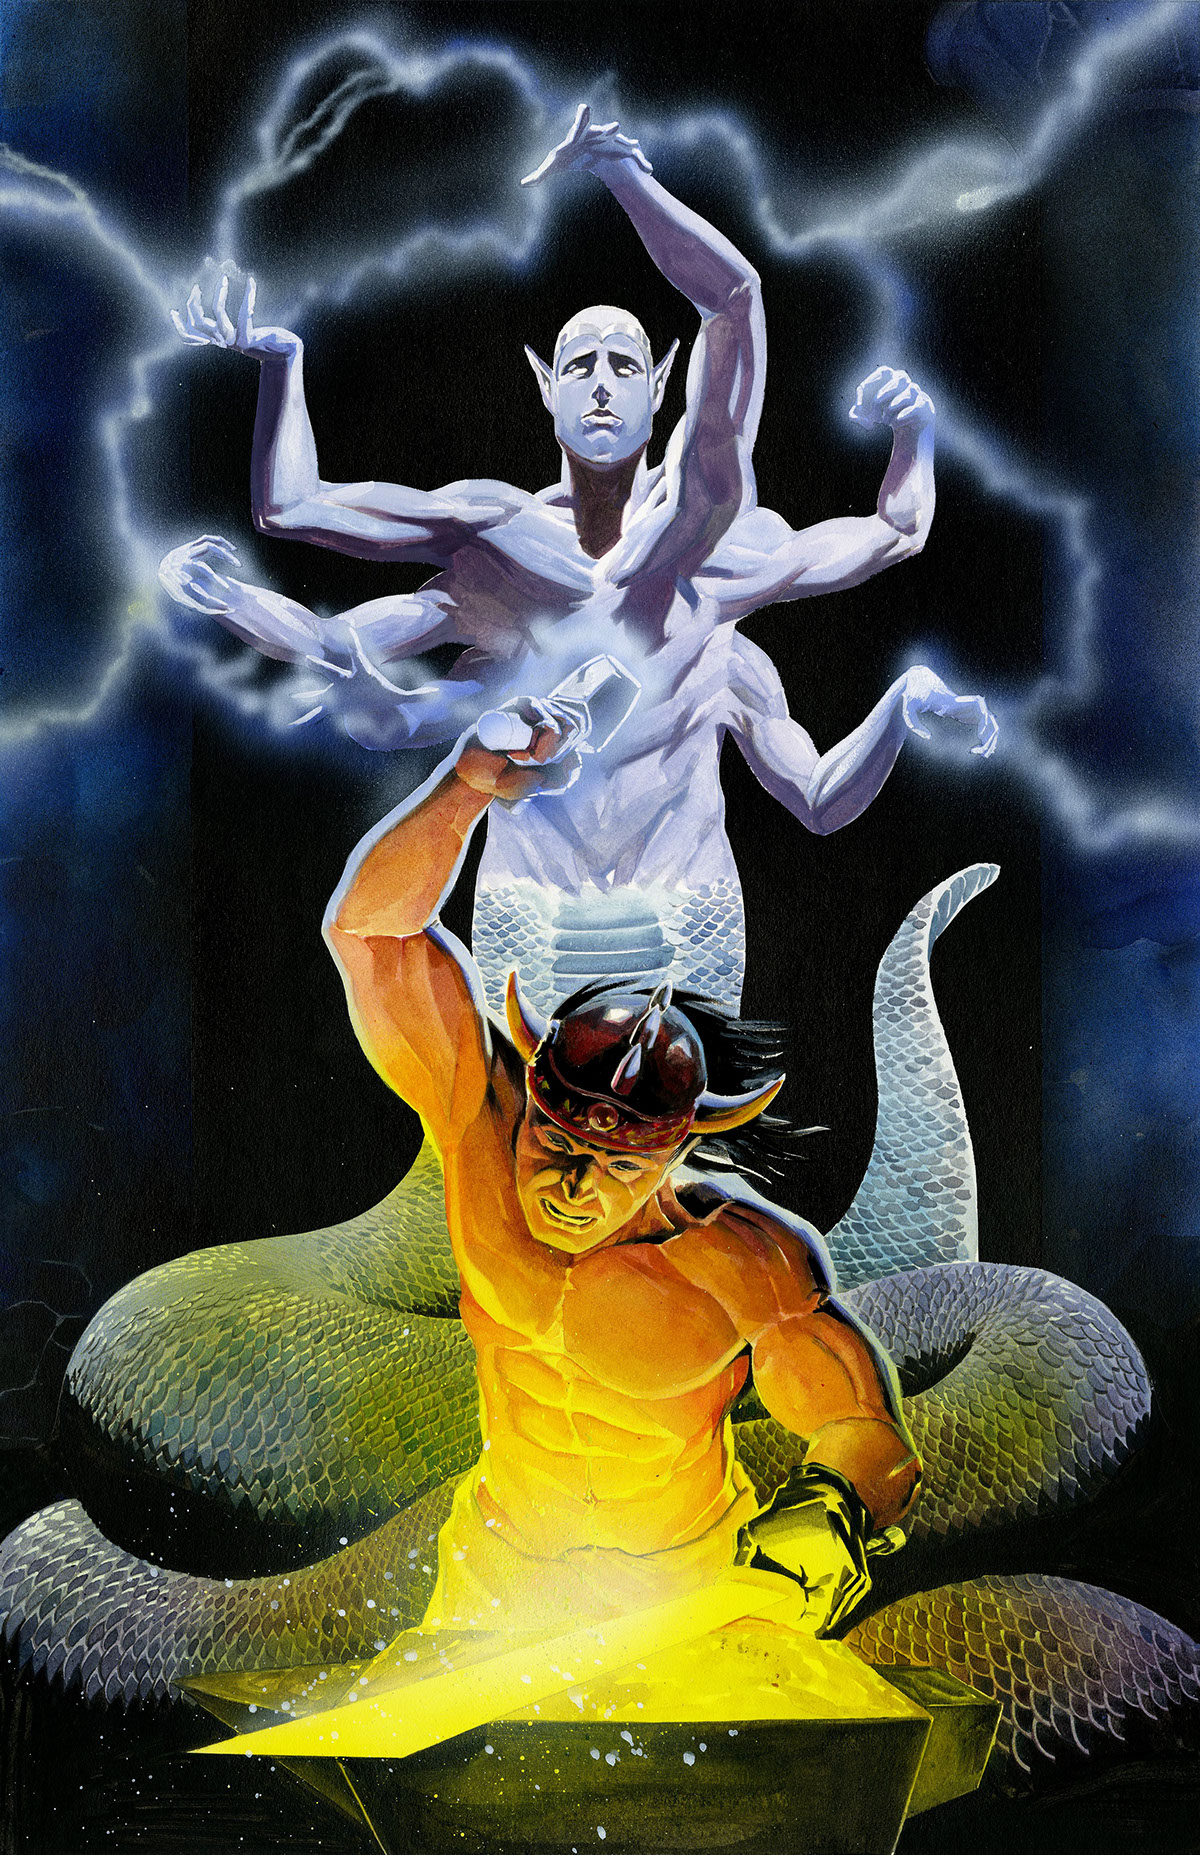 airbrush acrylic color commision artwork poster figure bookcover SCAD Sequantialart Sequantial